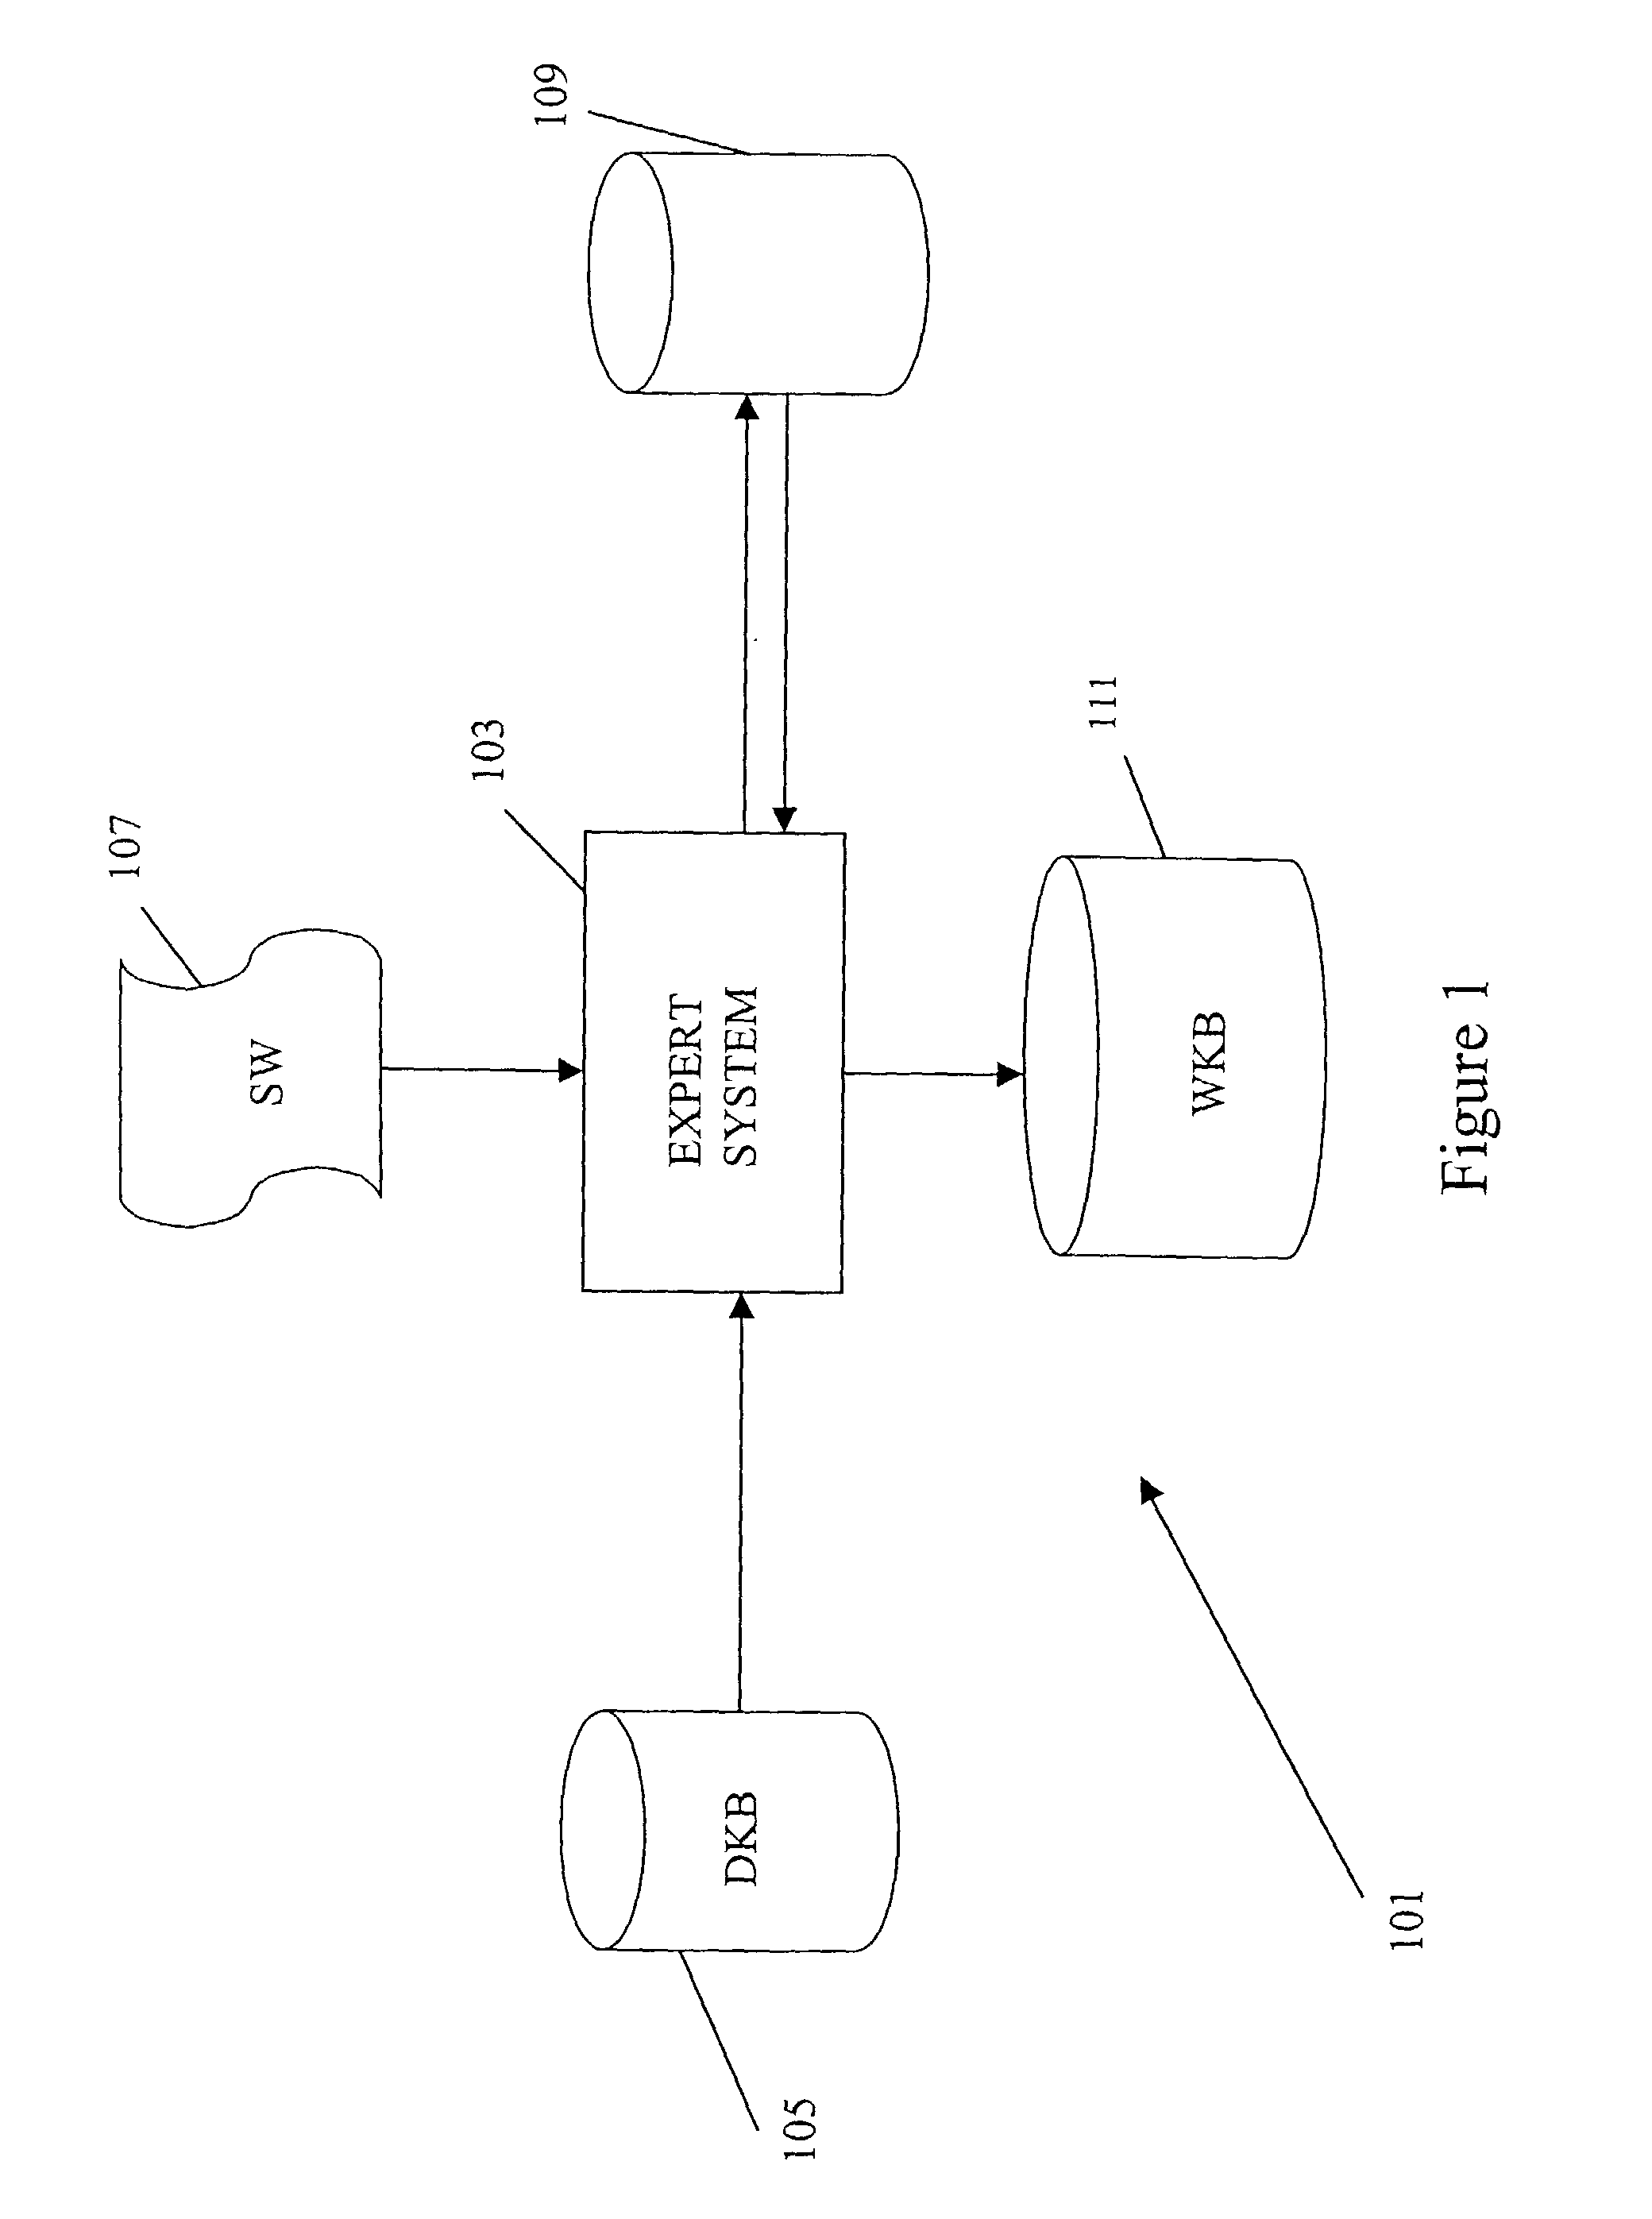 Method and apparatus for extracting knowledge from software code or other structured data